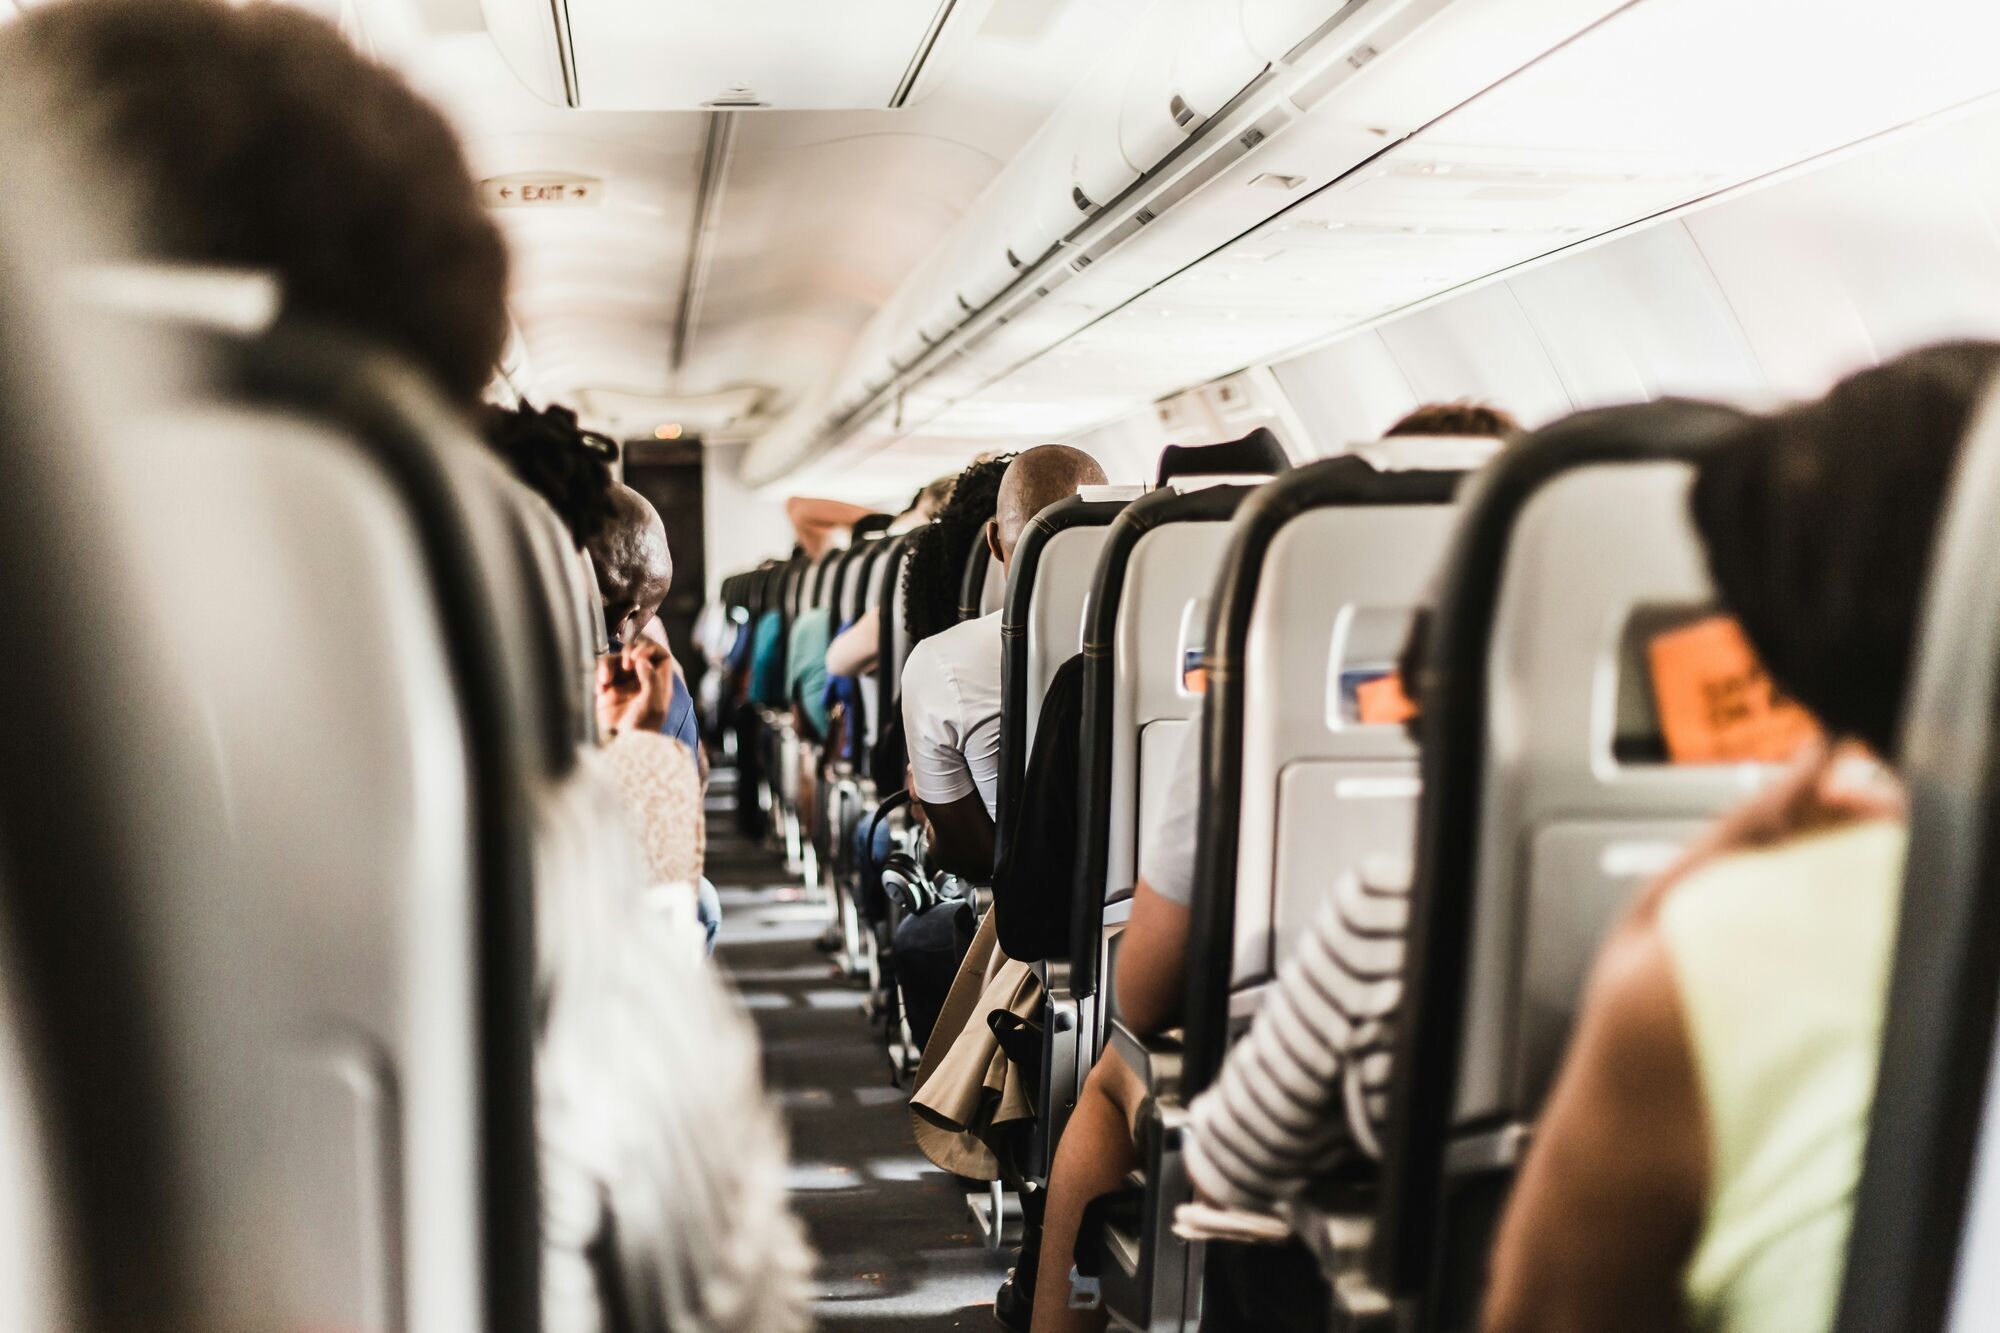 Long flights: 3 secrets that will help you feel good during and after the flight